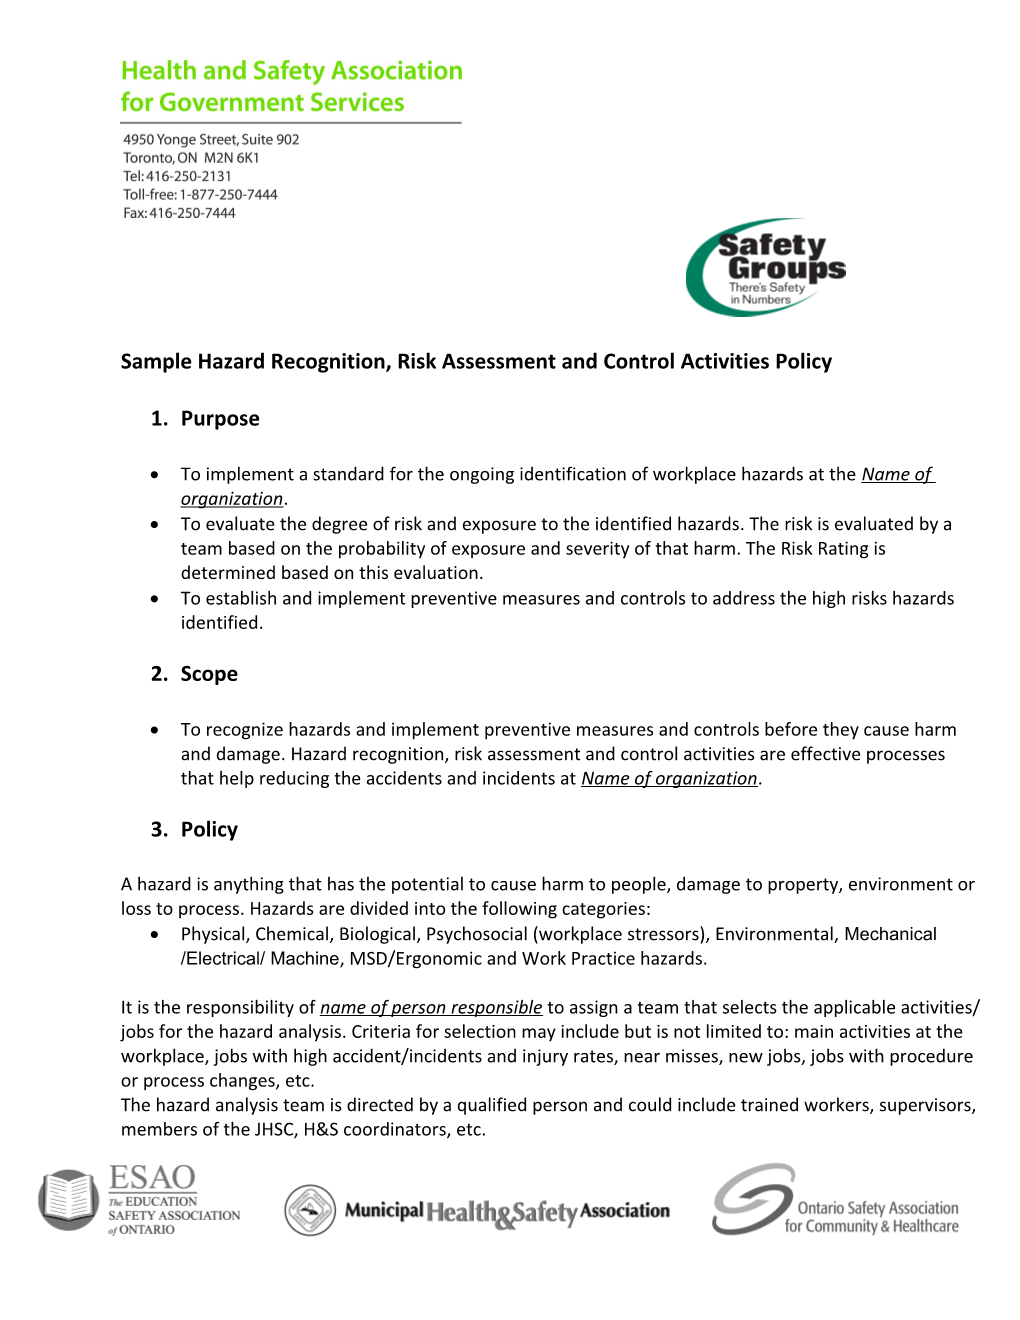 Sample Hazard Recognition, Risk Assessment and Control Activities Policy